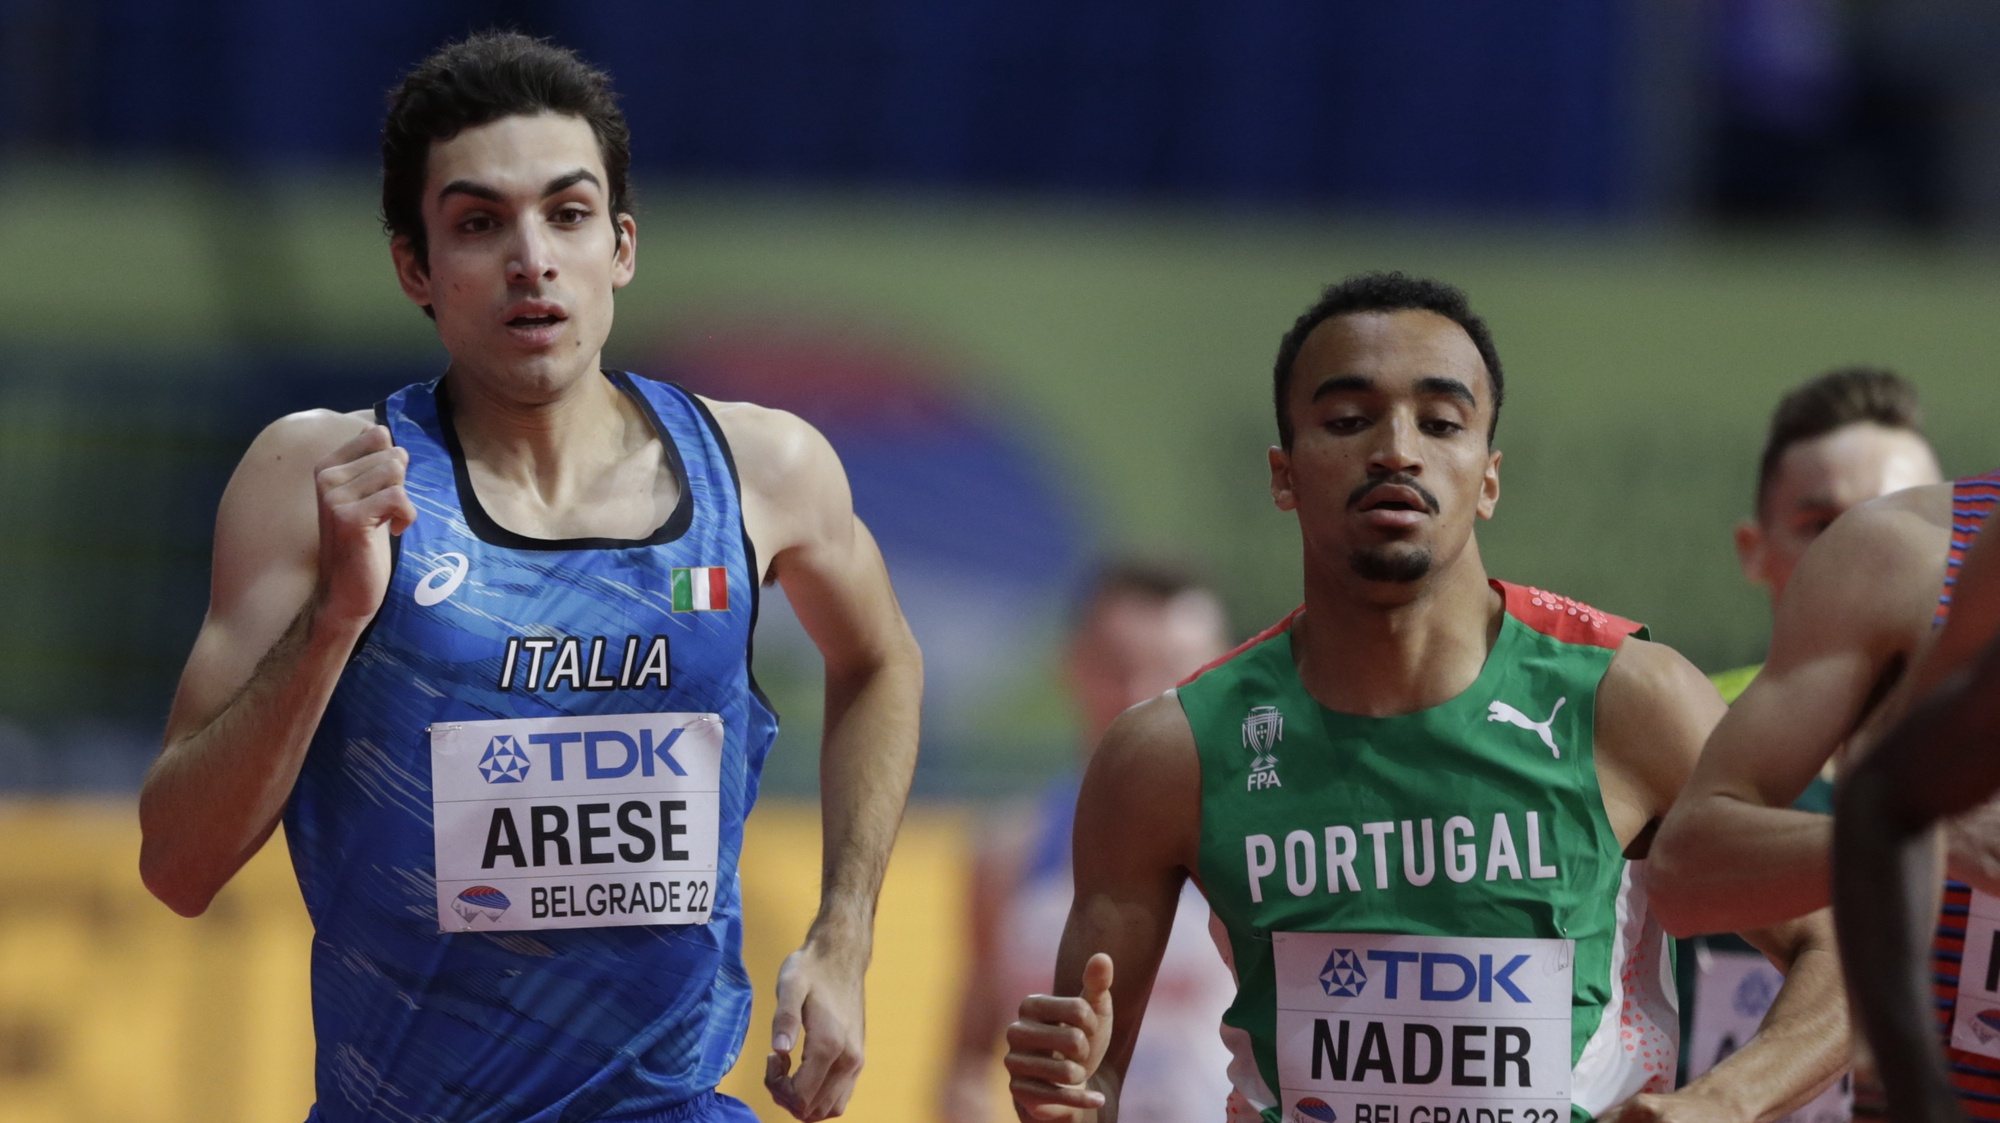 epa09835695 Pietro Arese of Italy (L) and Isaac Nader of Portugal (R) compete in the men’s 1500m heats at the World Athletics Indoor Championships in Belgrade, Serbia, 19 March 2022.  EPA/ANDREJ CUKIC